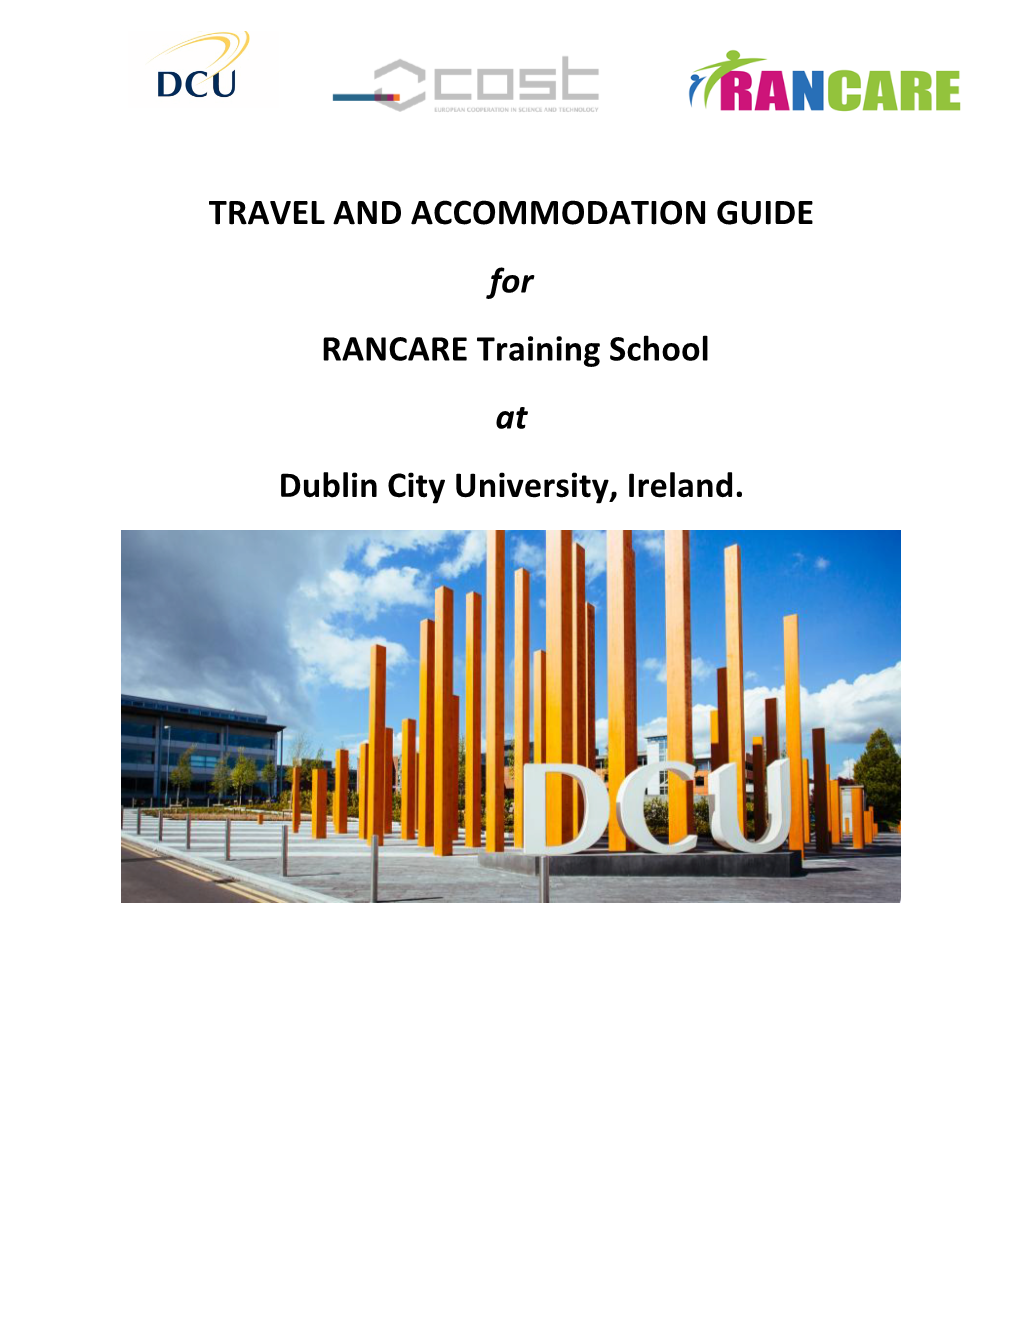 Dublin Training School 2018 Travel and Accommodation Guide